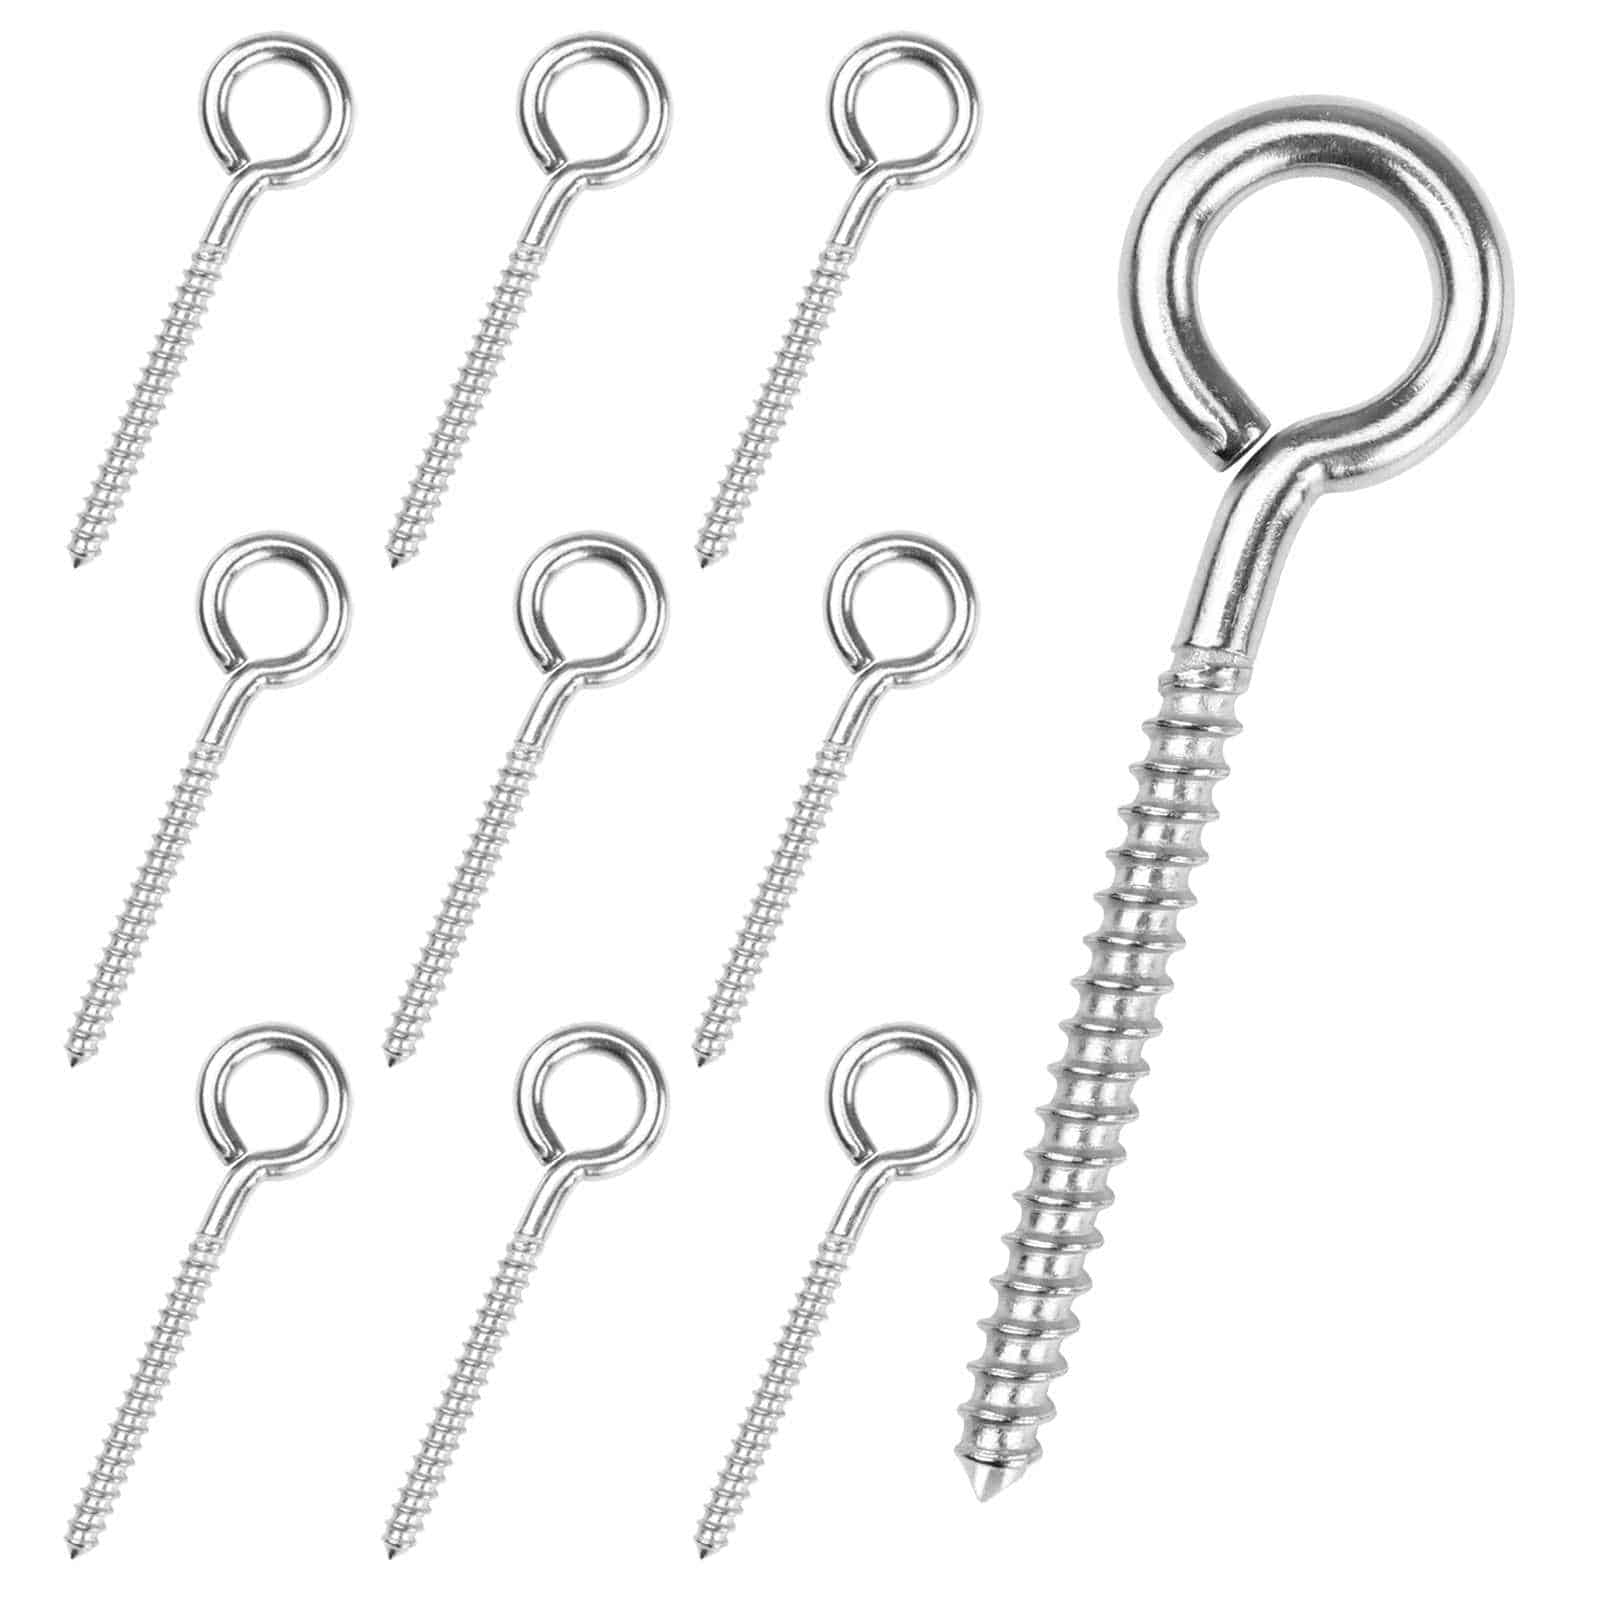 Muzata 10Pack 3 3inch M6 Black Screw Eye Hooks Stainless Steel Heavy Duty for Wood Securing Cables Wire Terminal Ringlet Stand at MechanicSurplus.com MZZ0130B